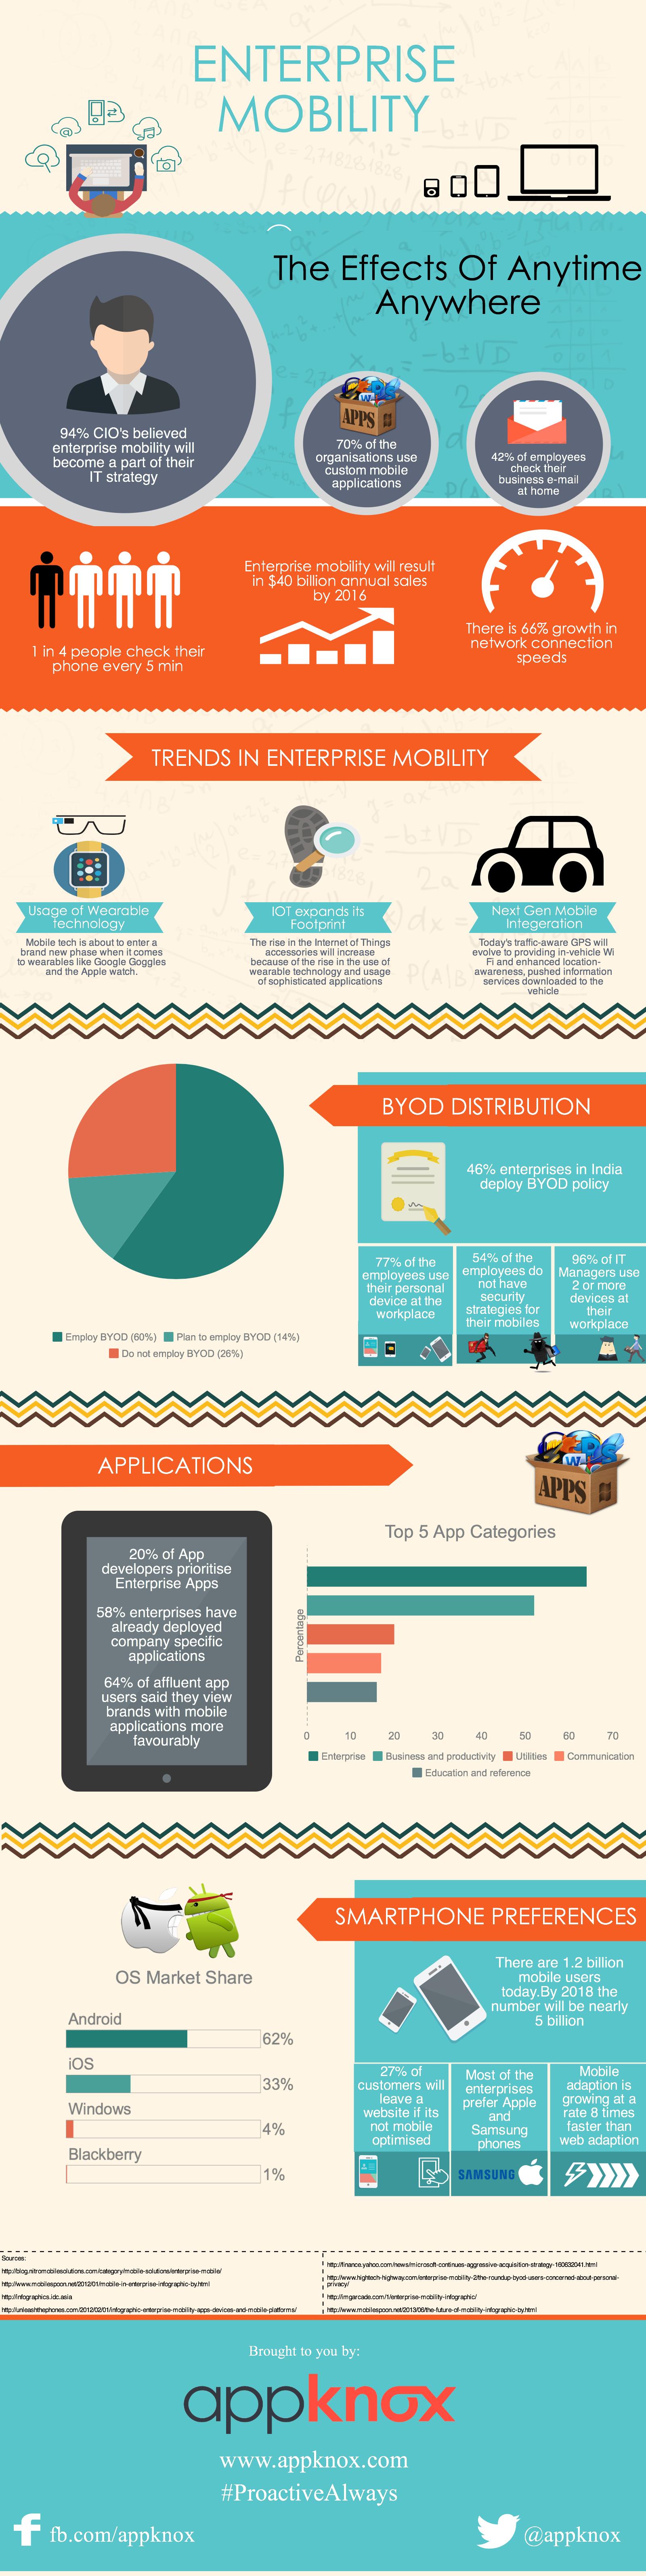 [Infographic] Enterprise Mobility - The Effects Of Anytime Anywhere